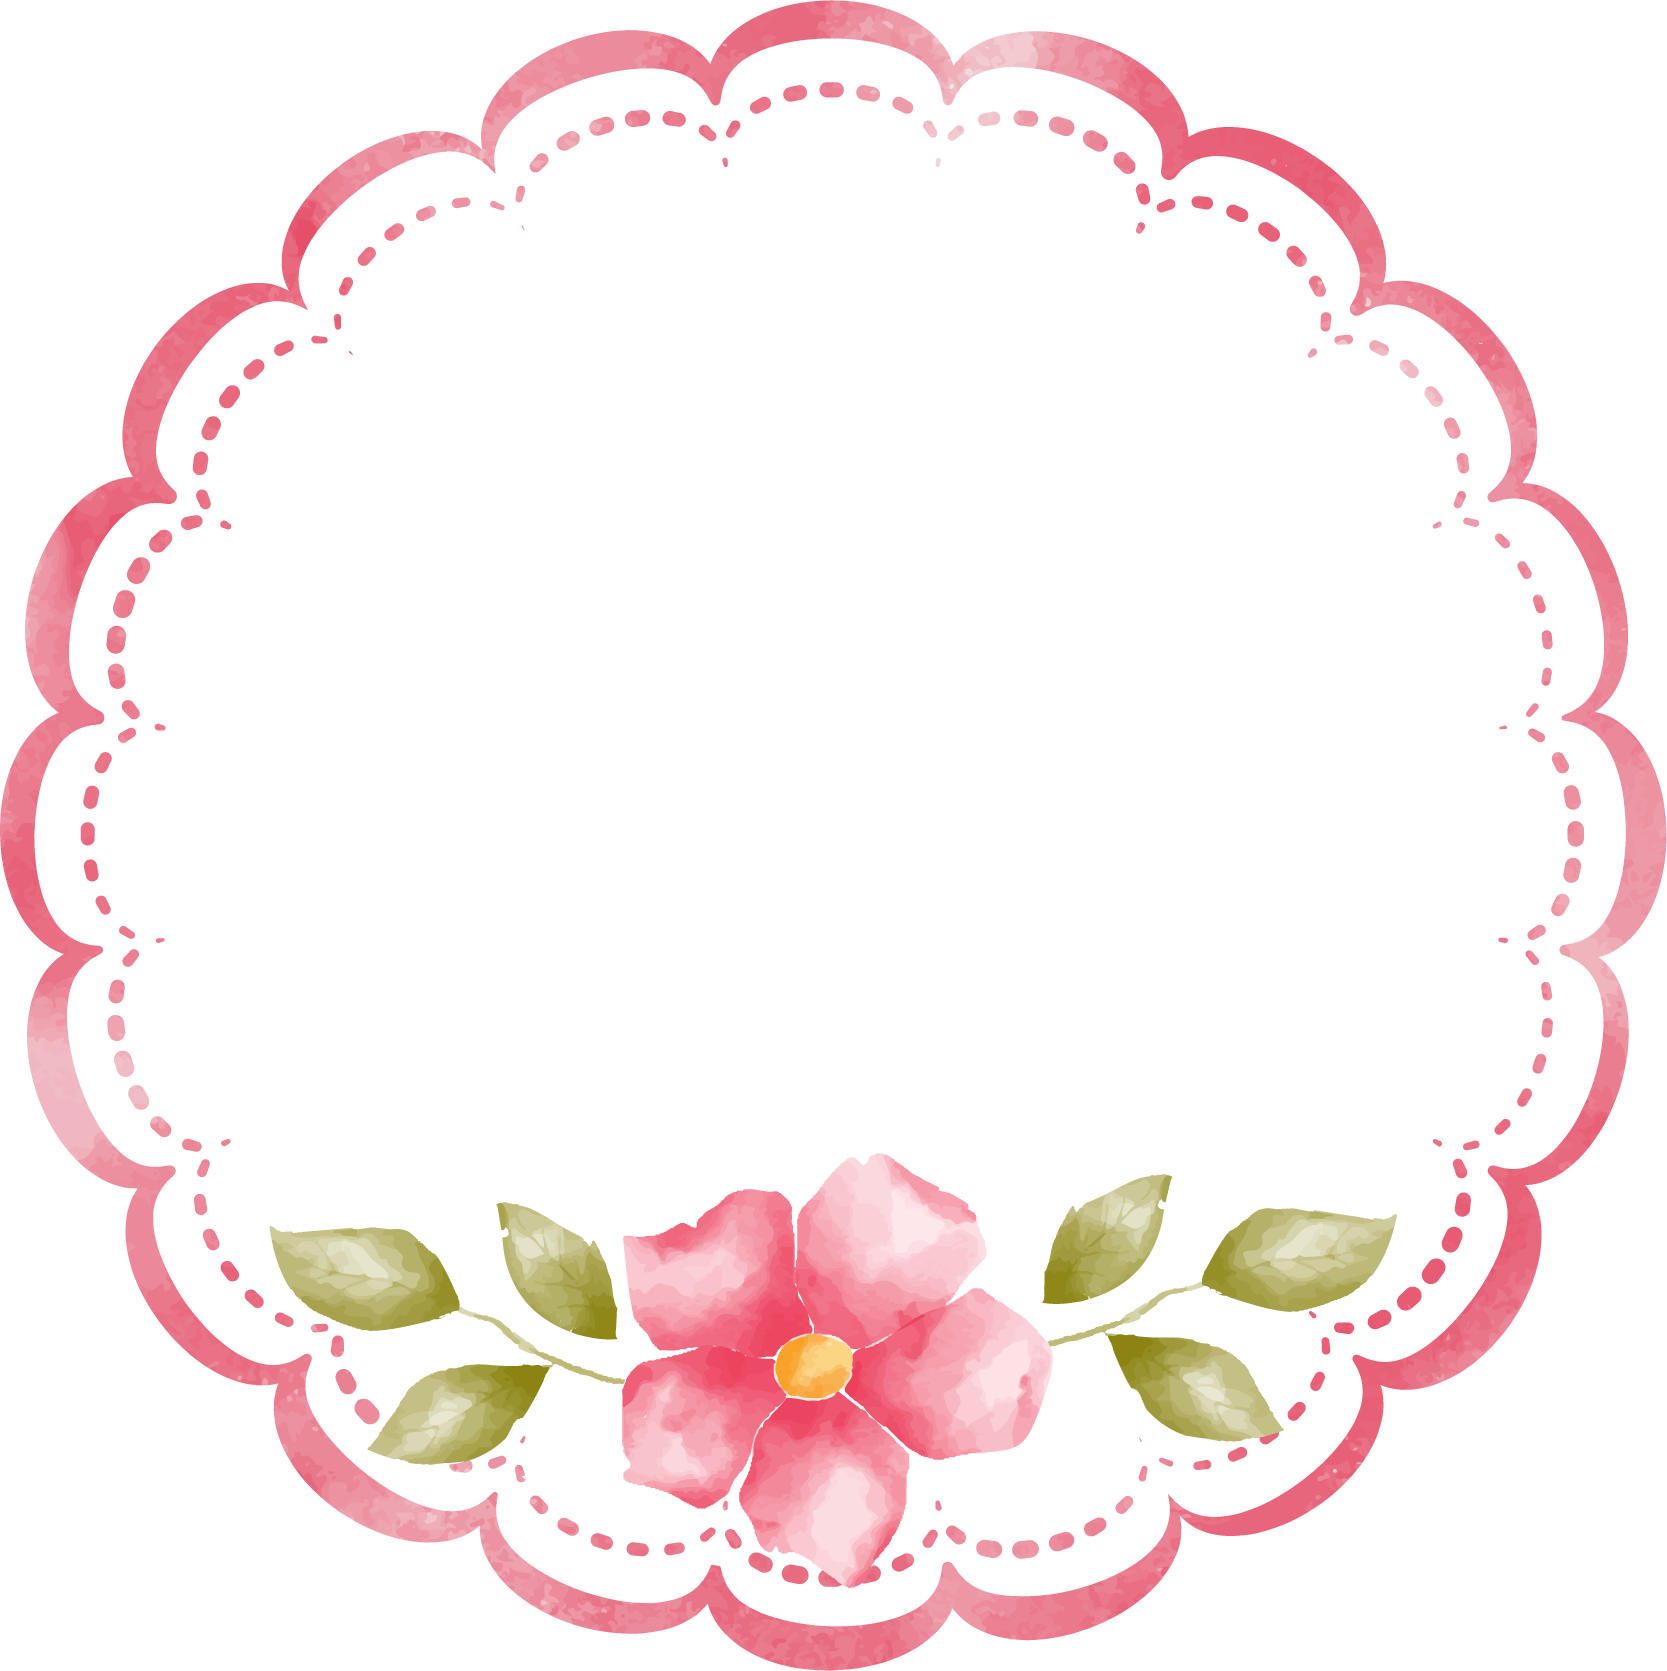 Frame Round Christmas Free Transparent Image HQ PNG Image